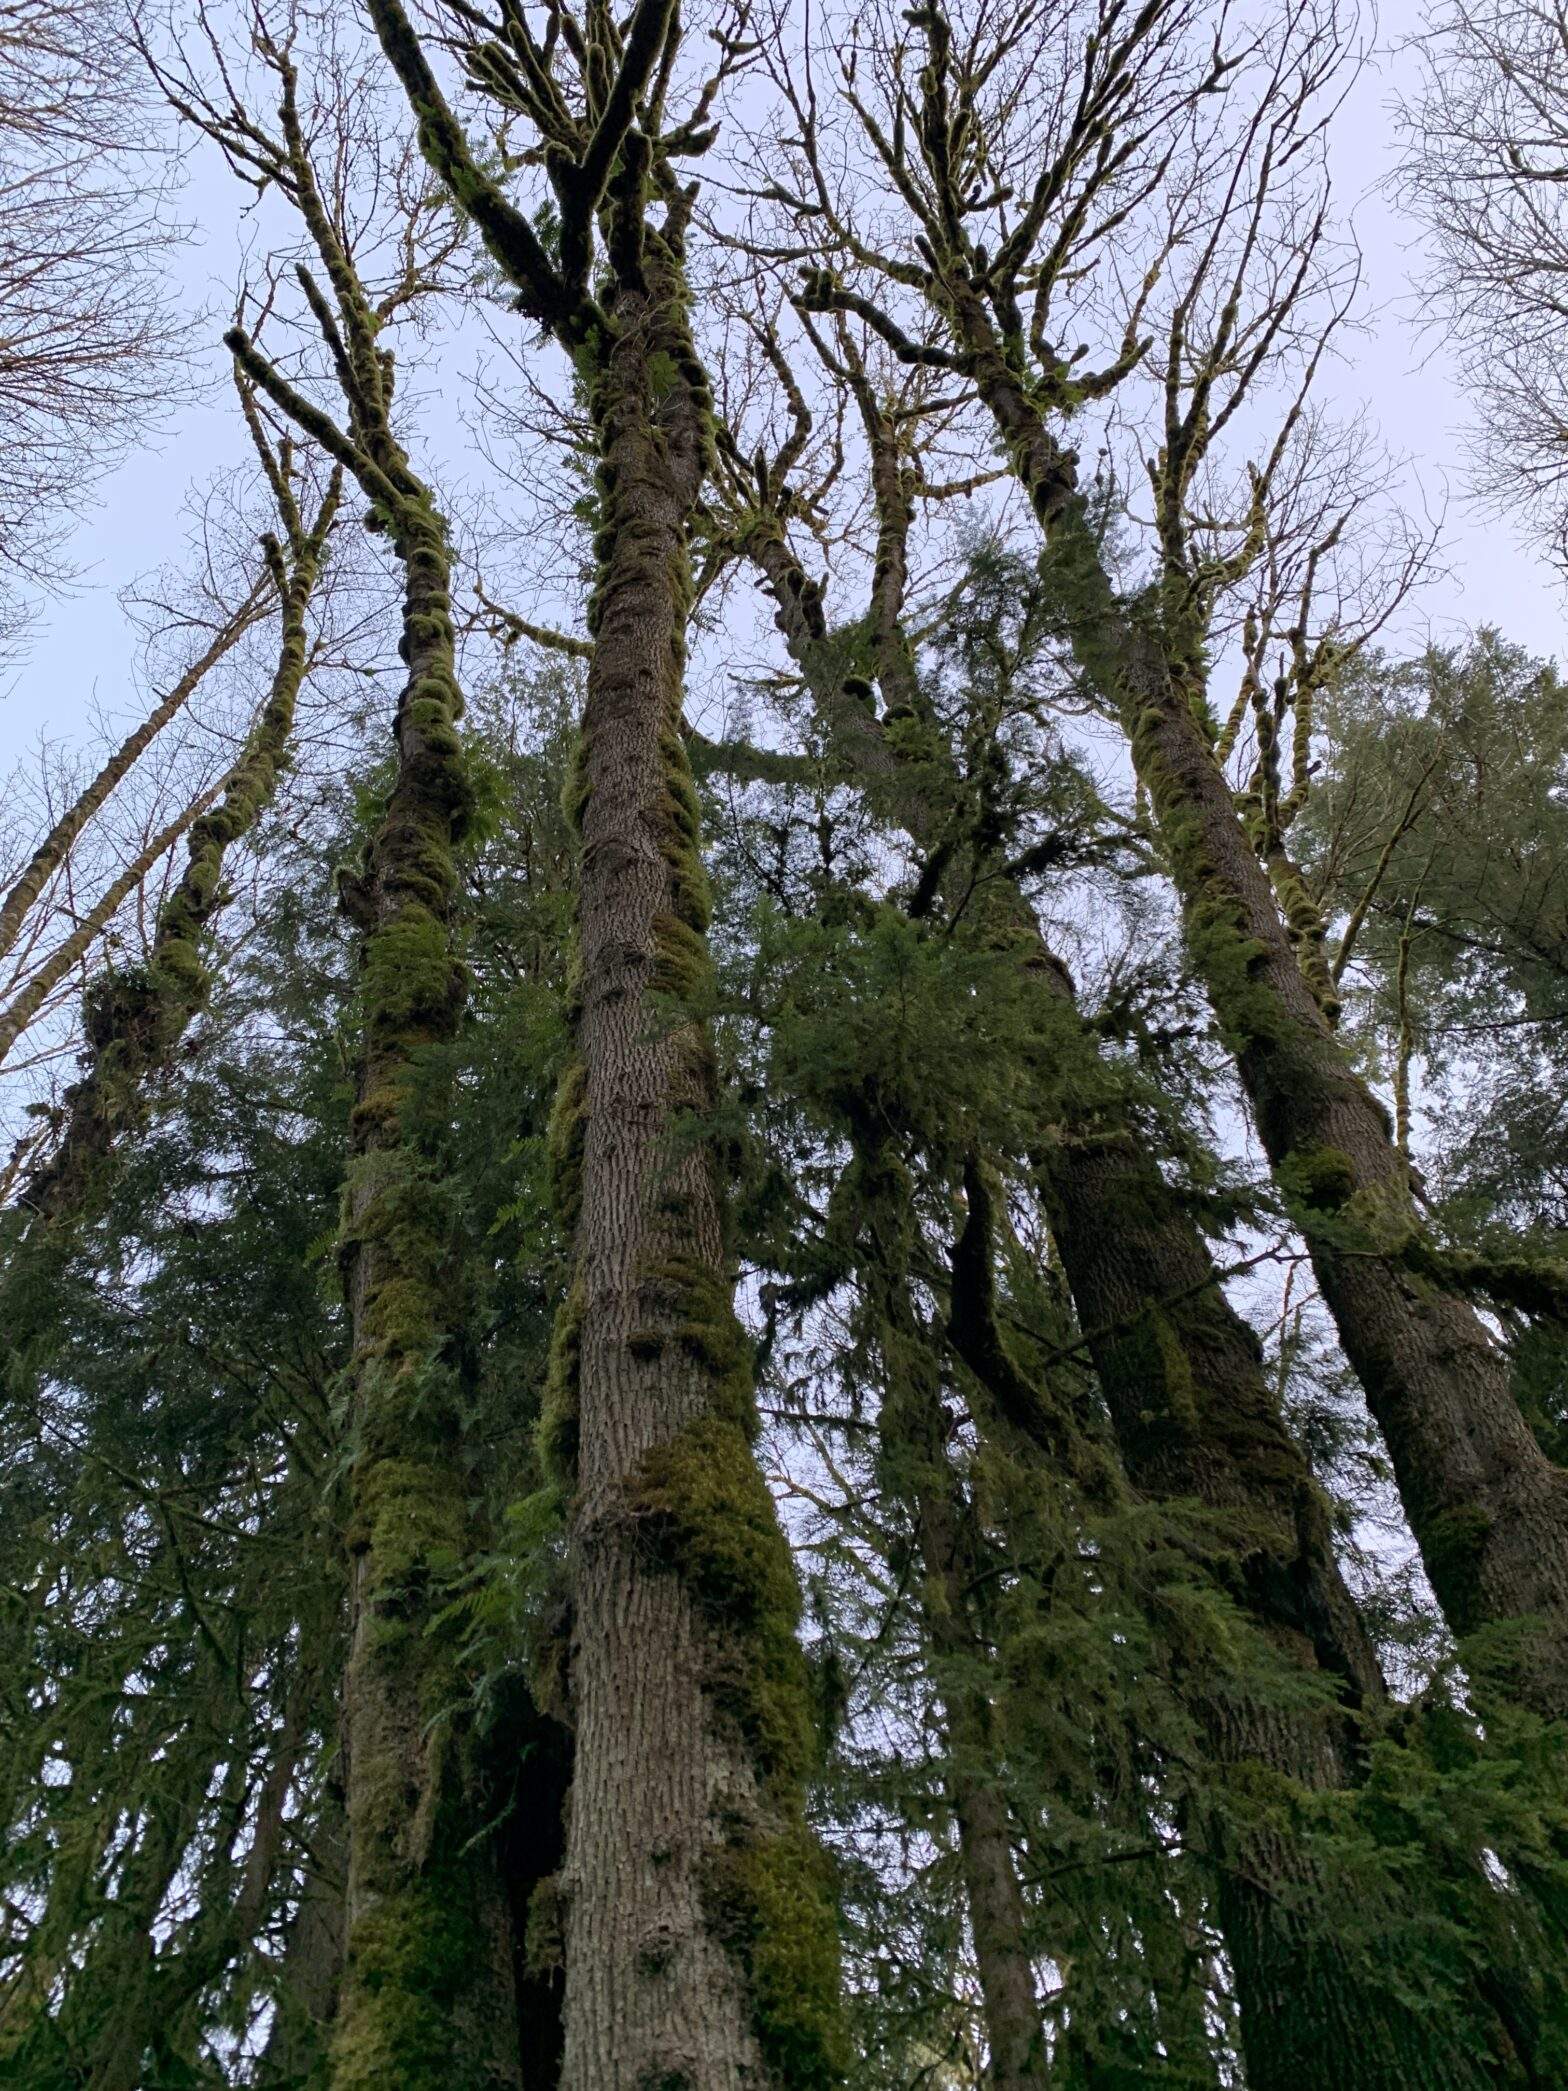 Majestic trees covered in moss with a blue sky reaching for the skies